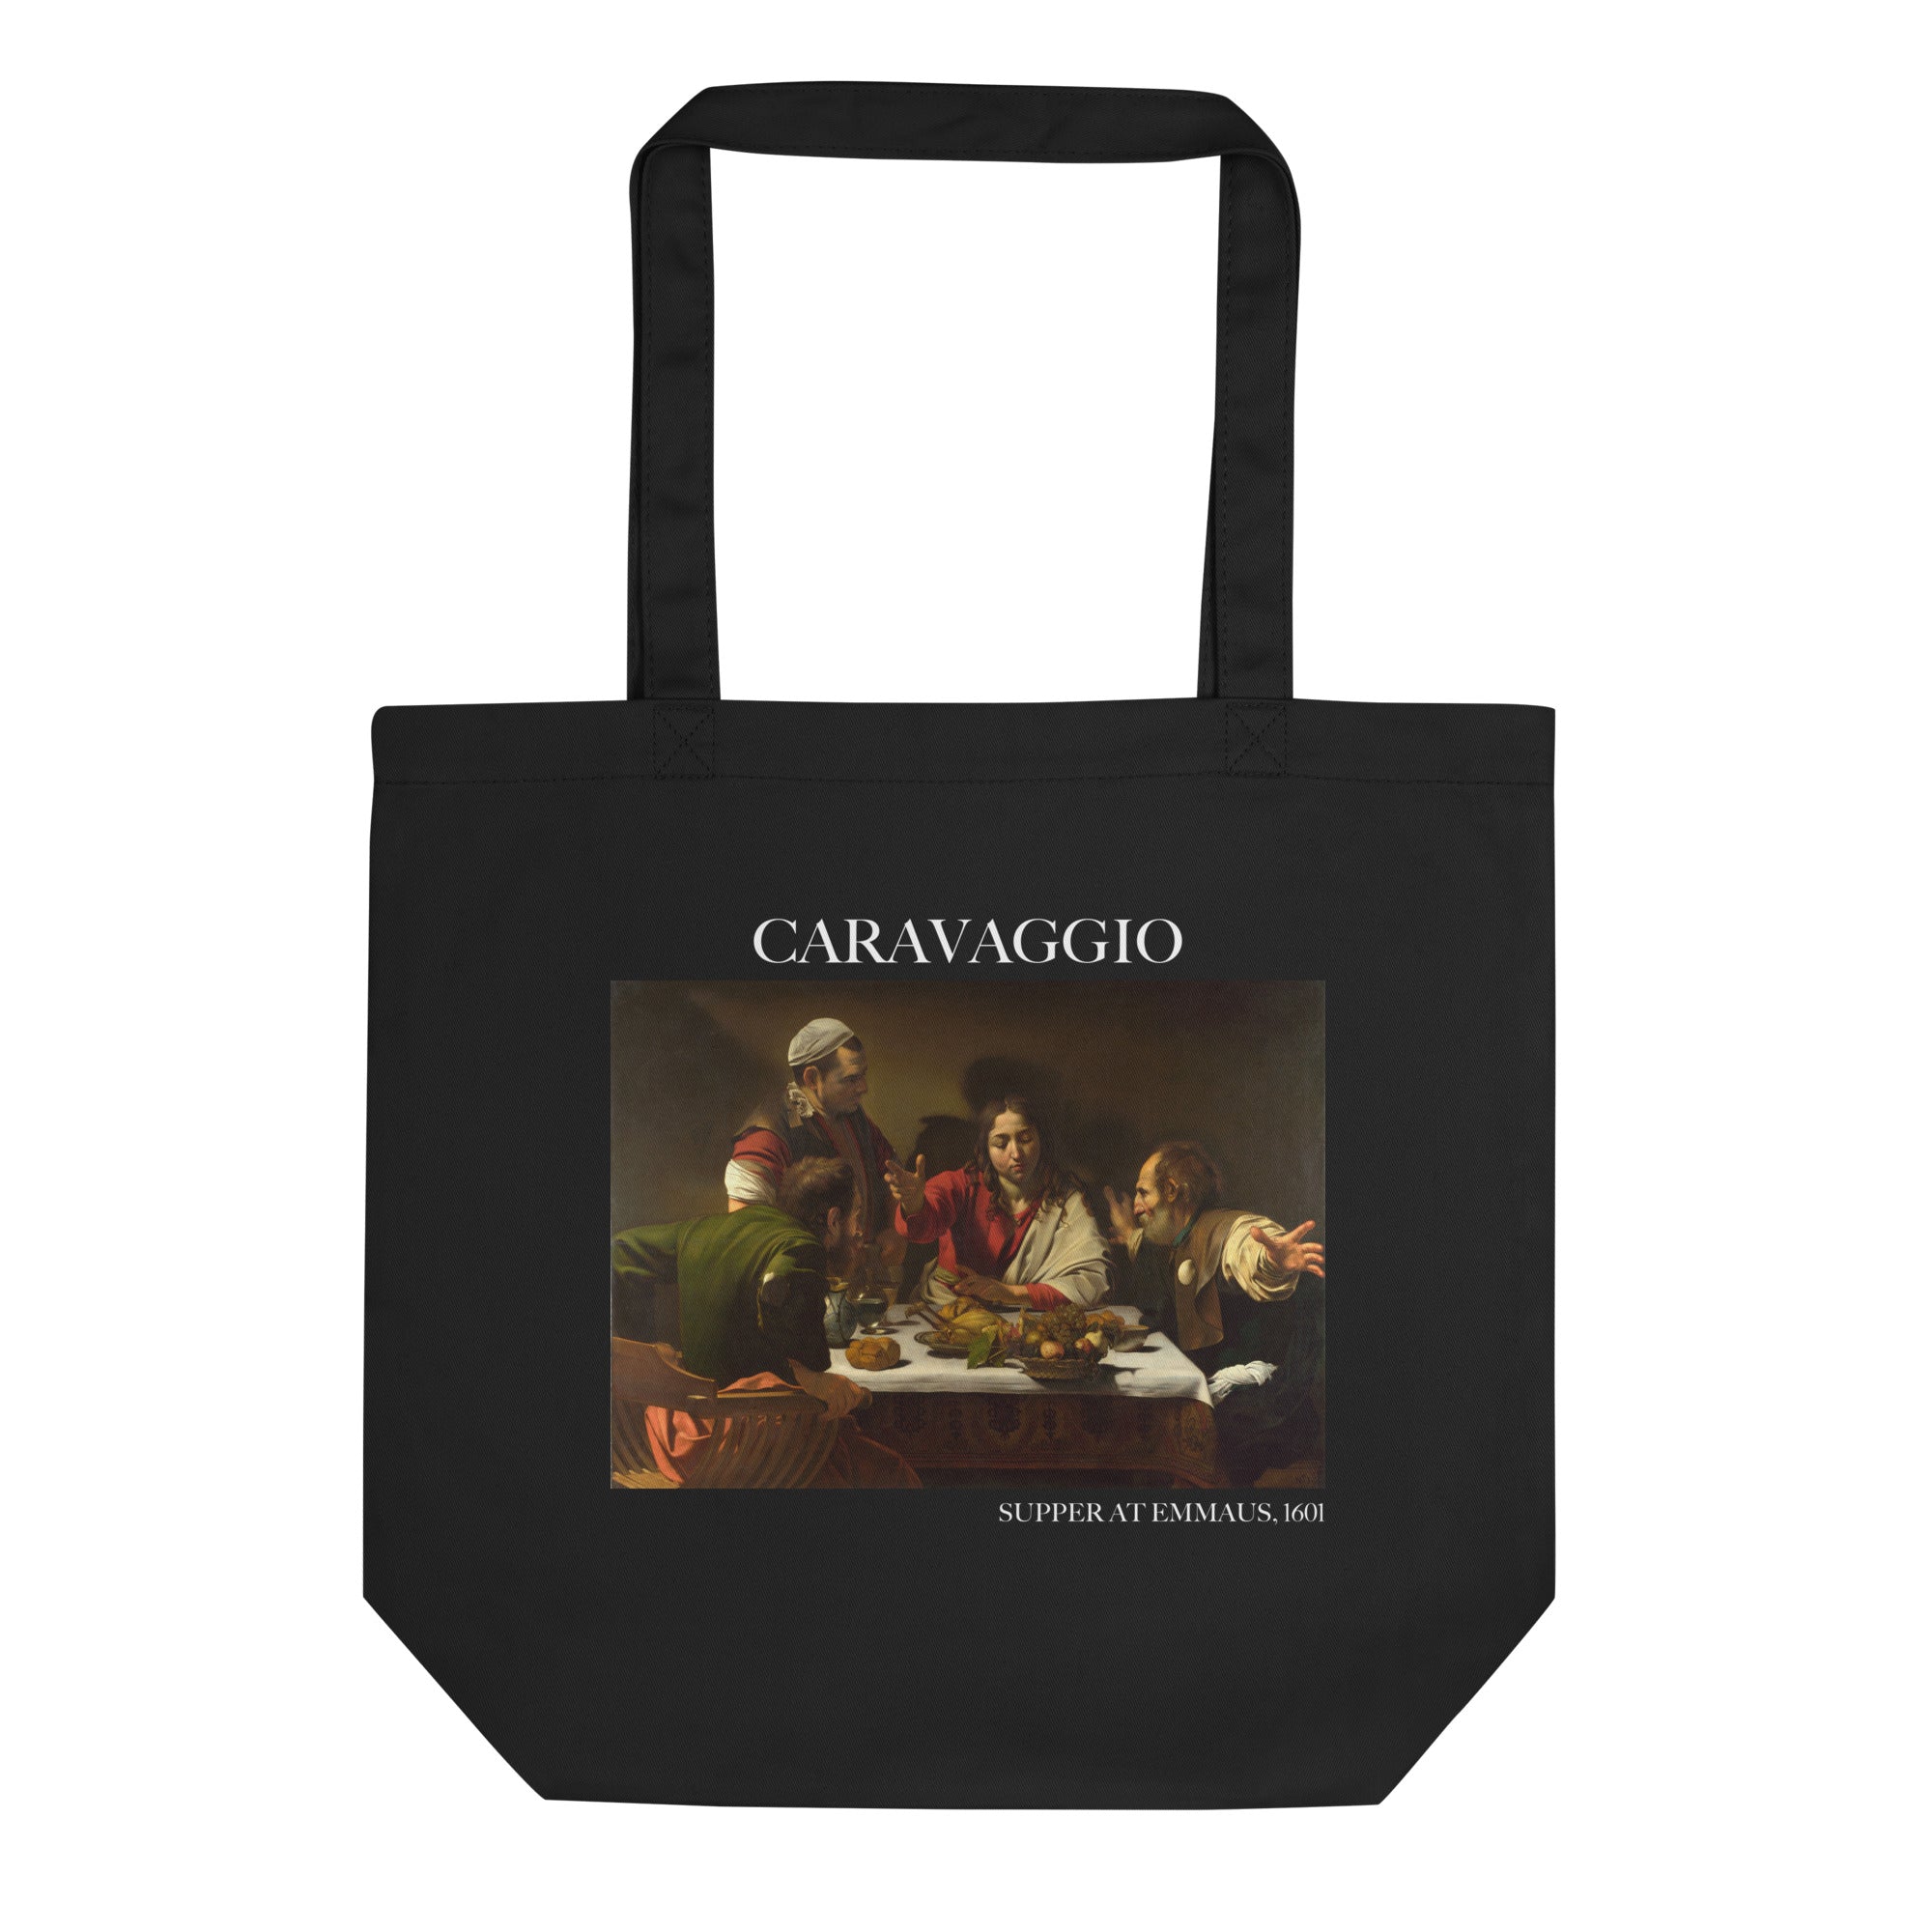 Artemisia Gentileschi 'Judith Slaying Holofernes' Famous Painting Totebag | Eco Friendly Art Tote Bag